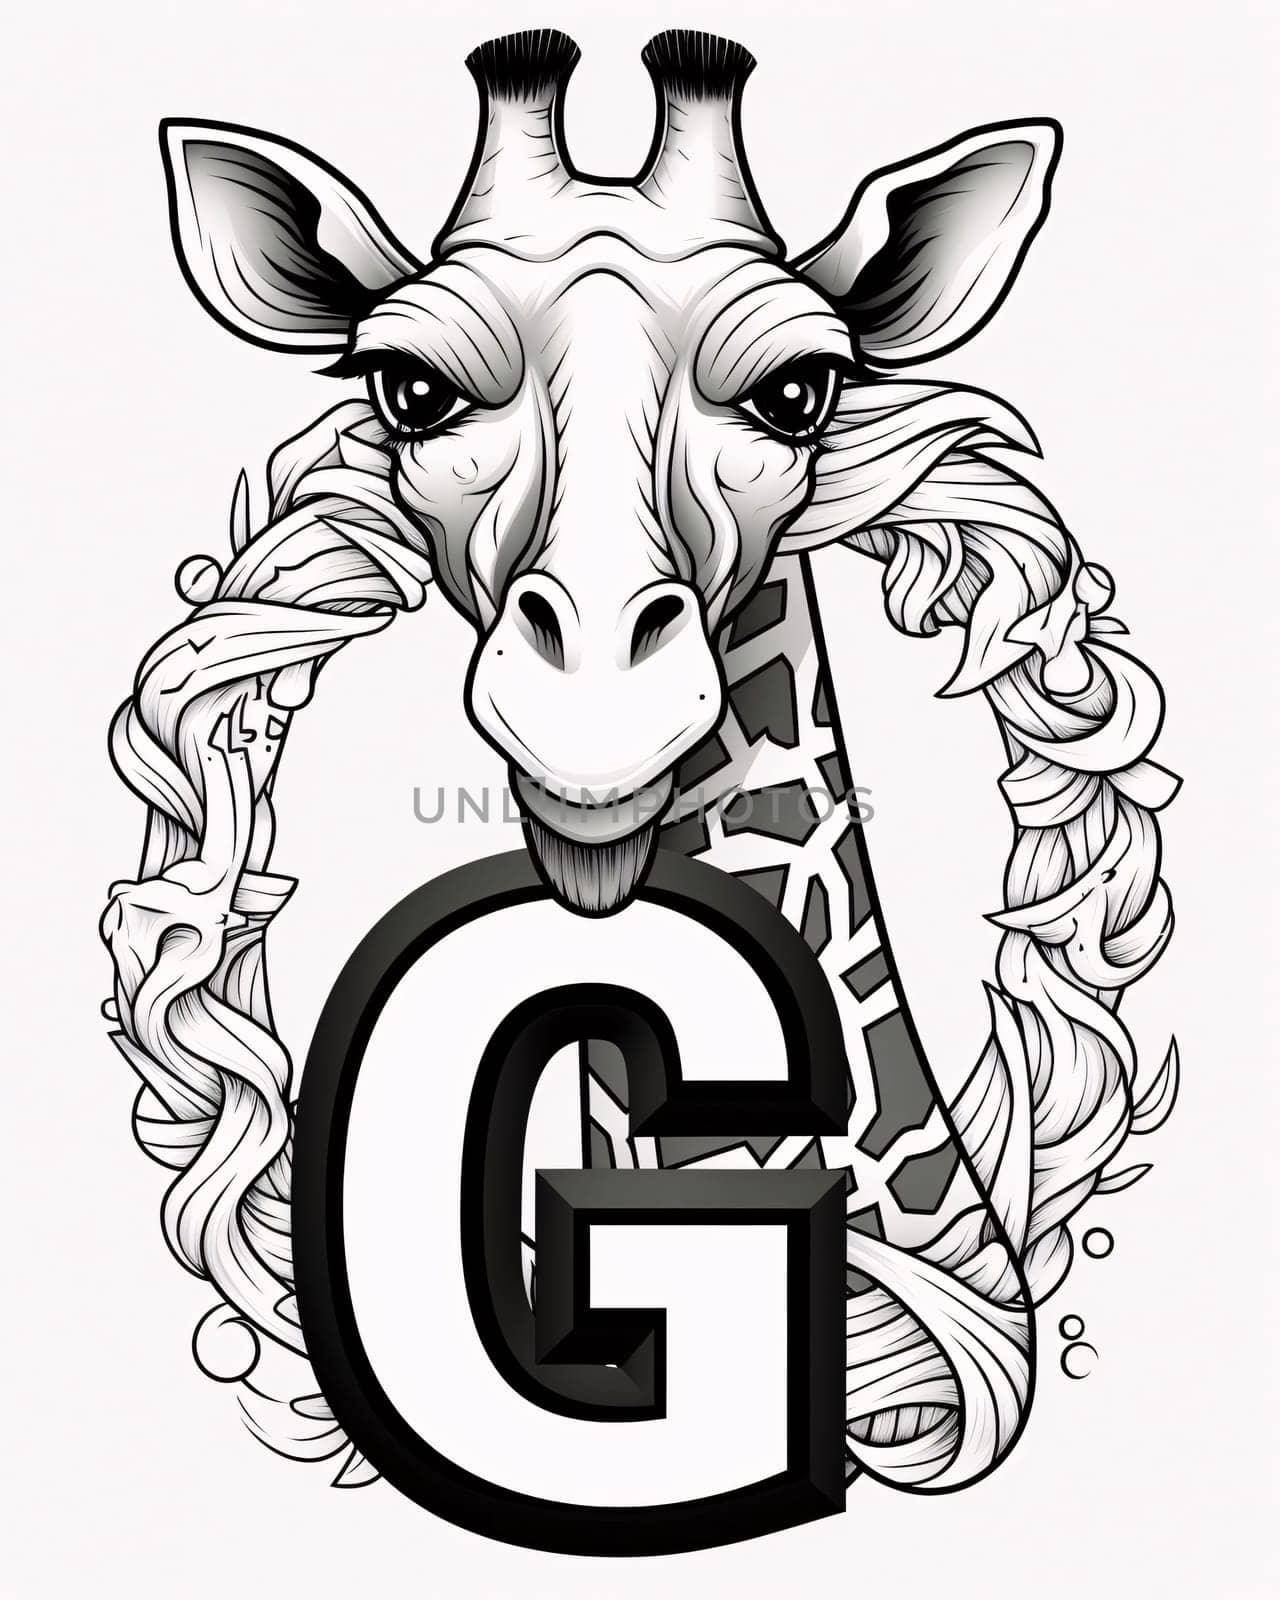 Graphic alphabet letters: Giraffe head with letter G in black and white illustration.